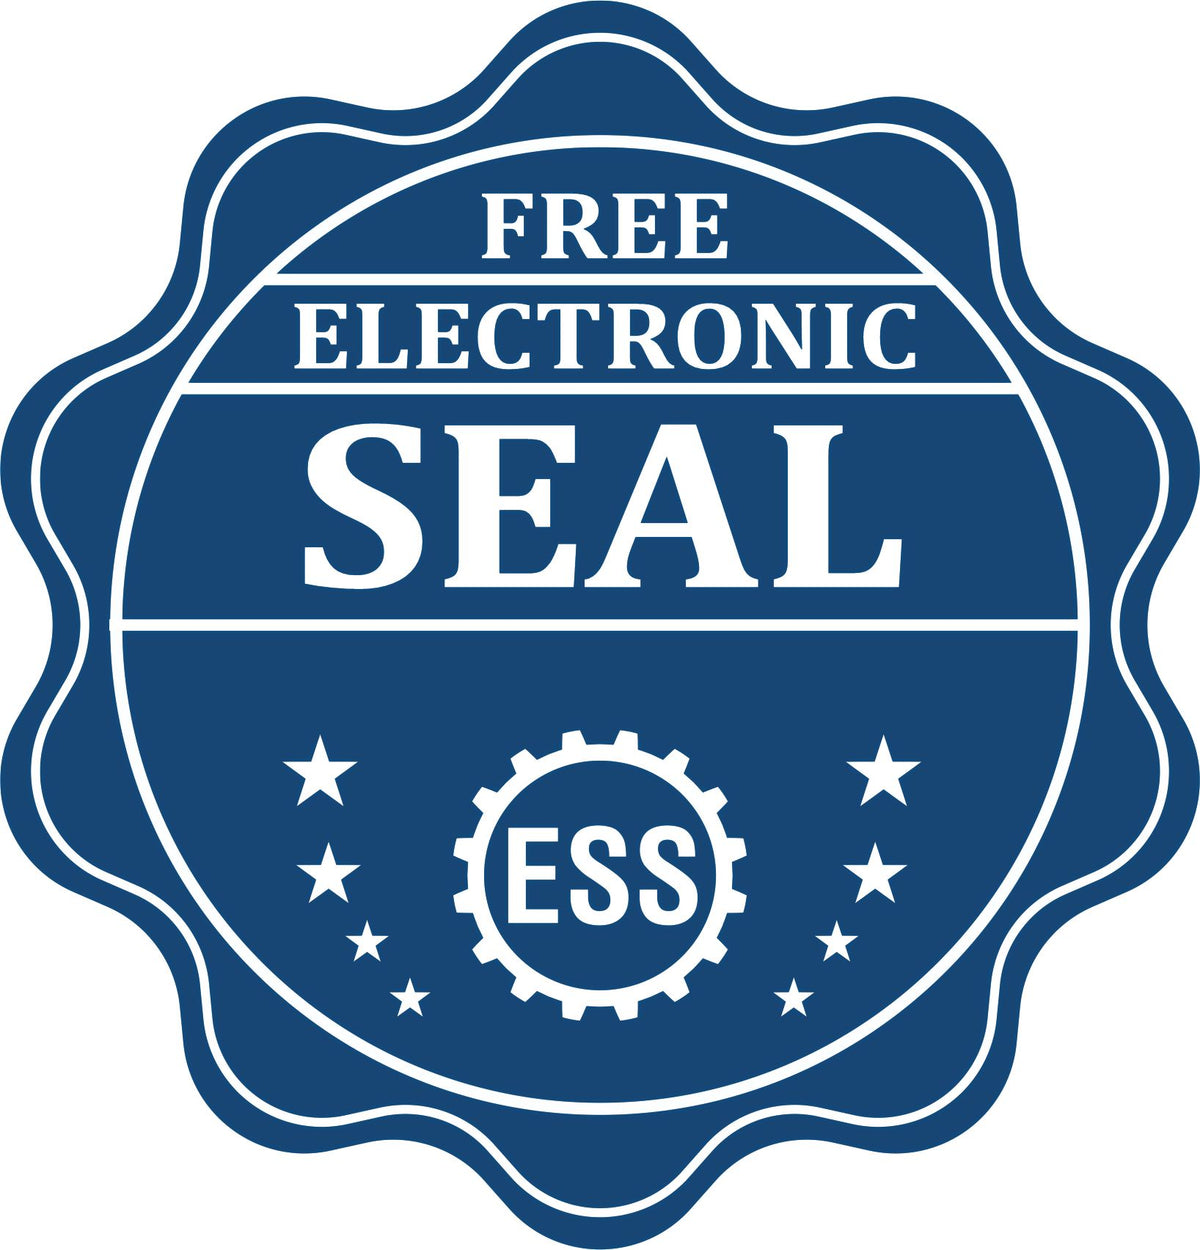 A badge showing a free electronic seal for the Gift New Mexico Landscape Architect Seal with stars and the ESS gear on the emblem.